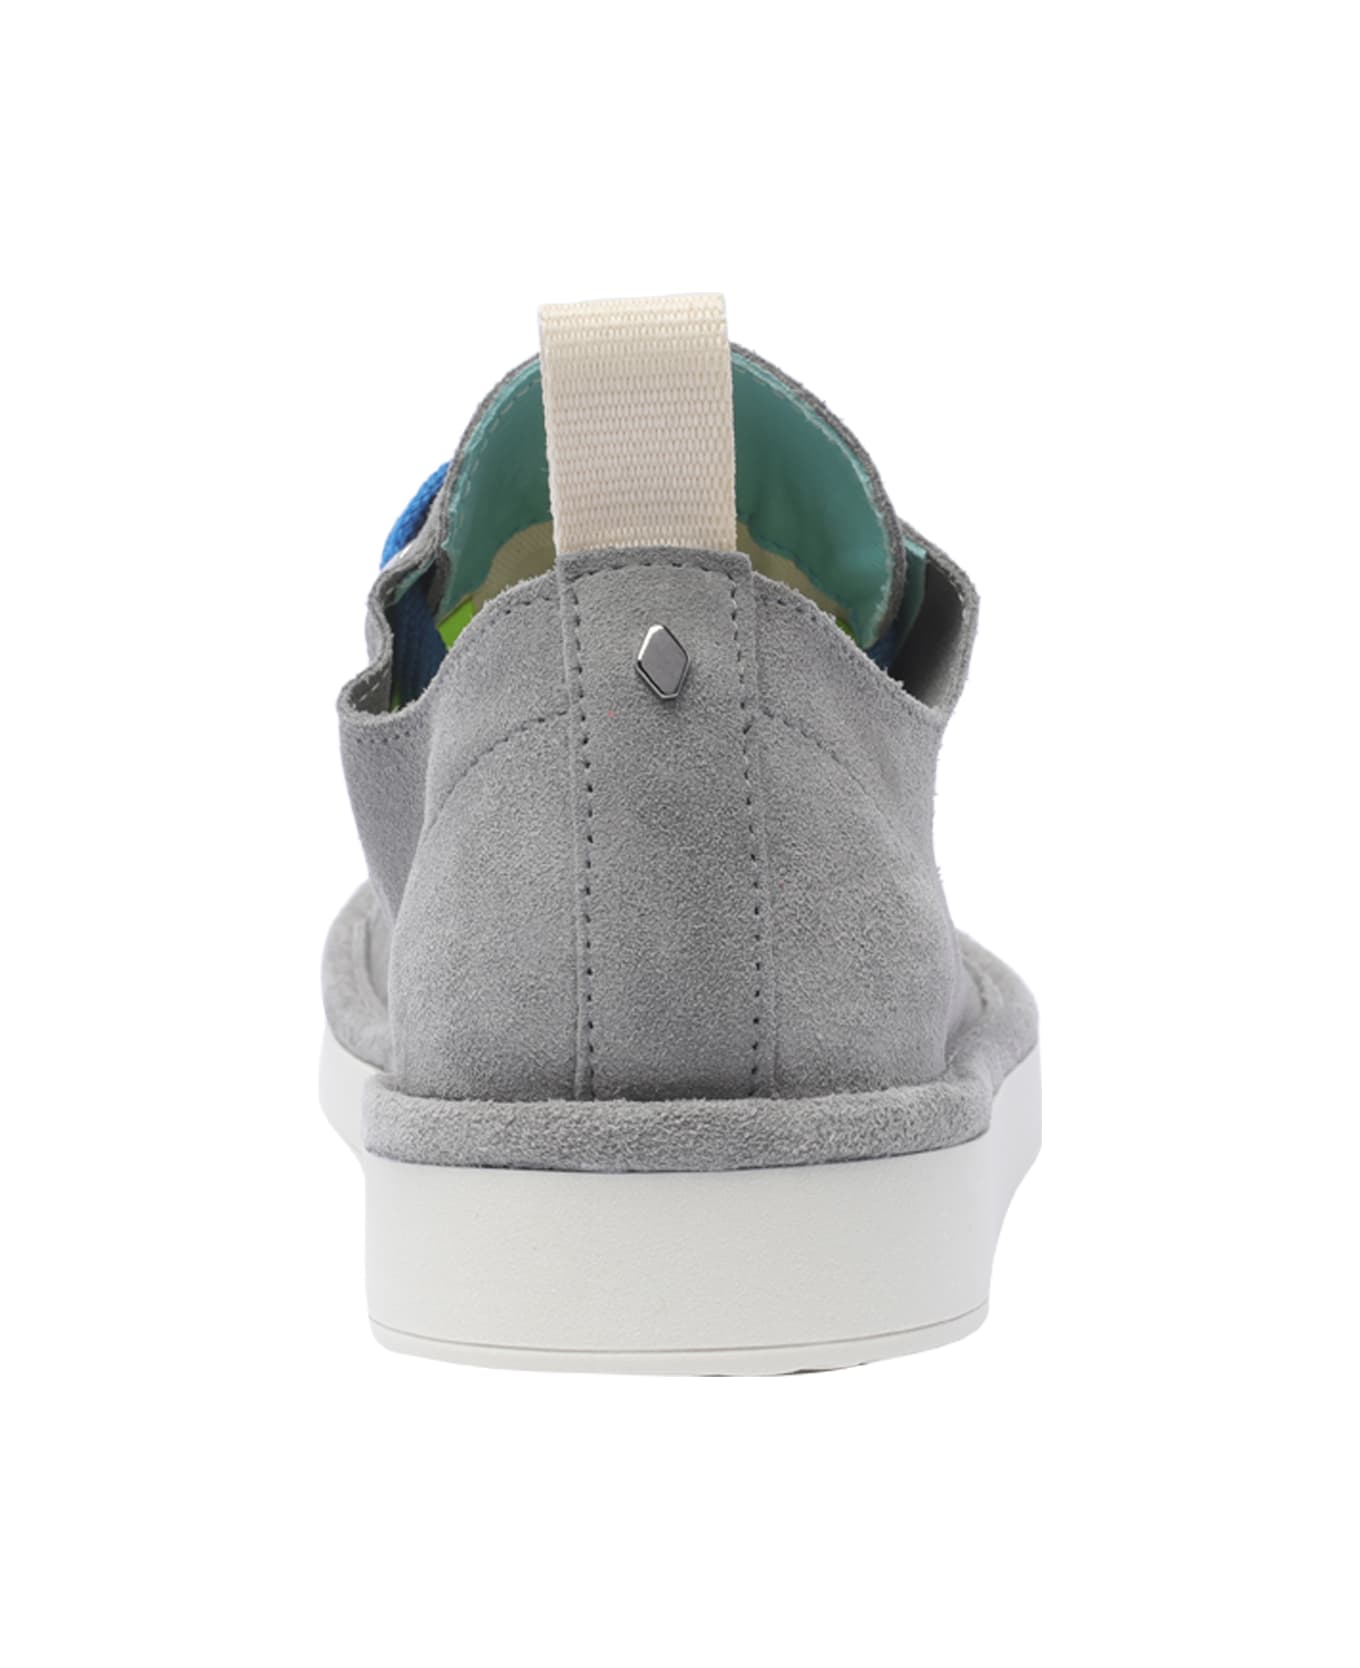 Panchic Laced-up Shoes P01 - Grey